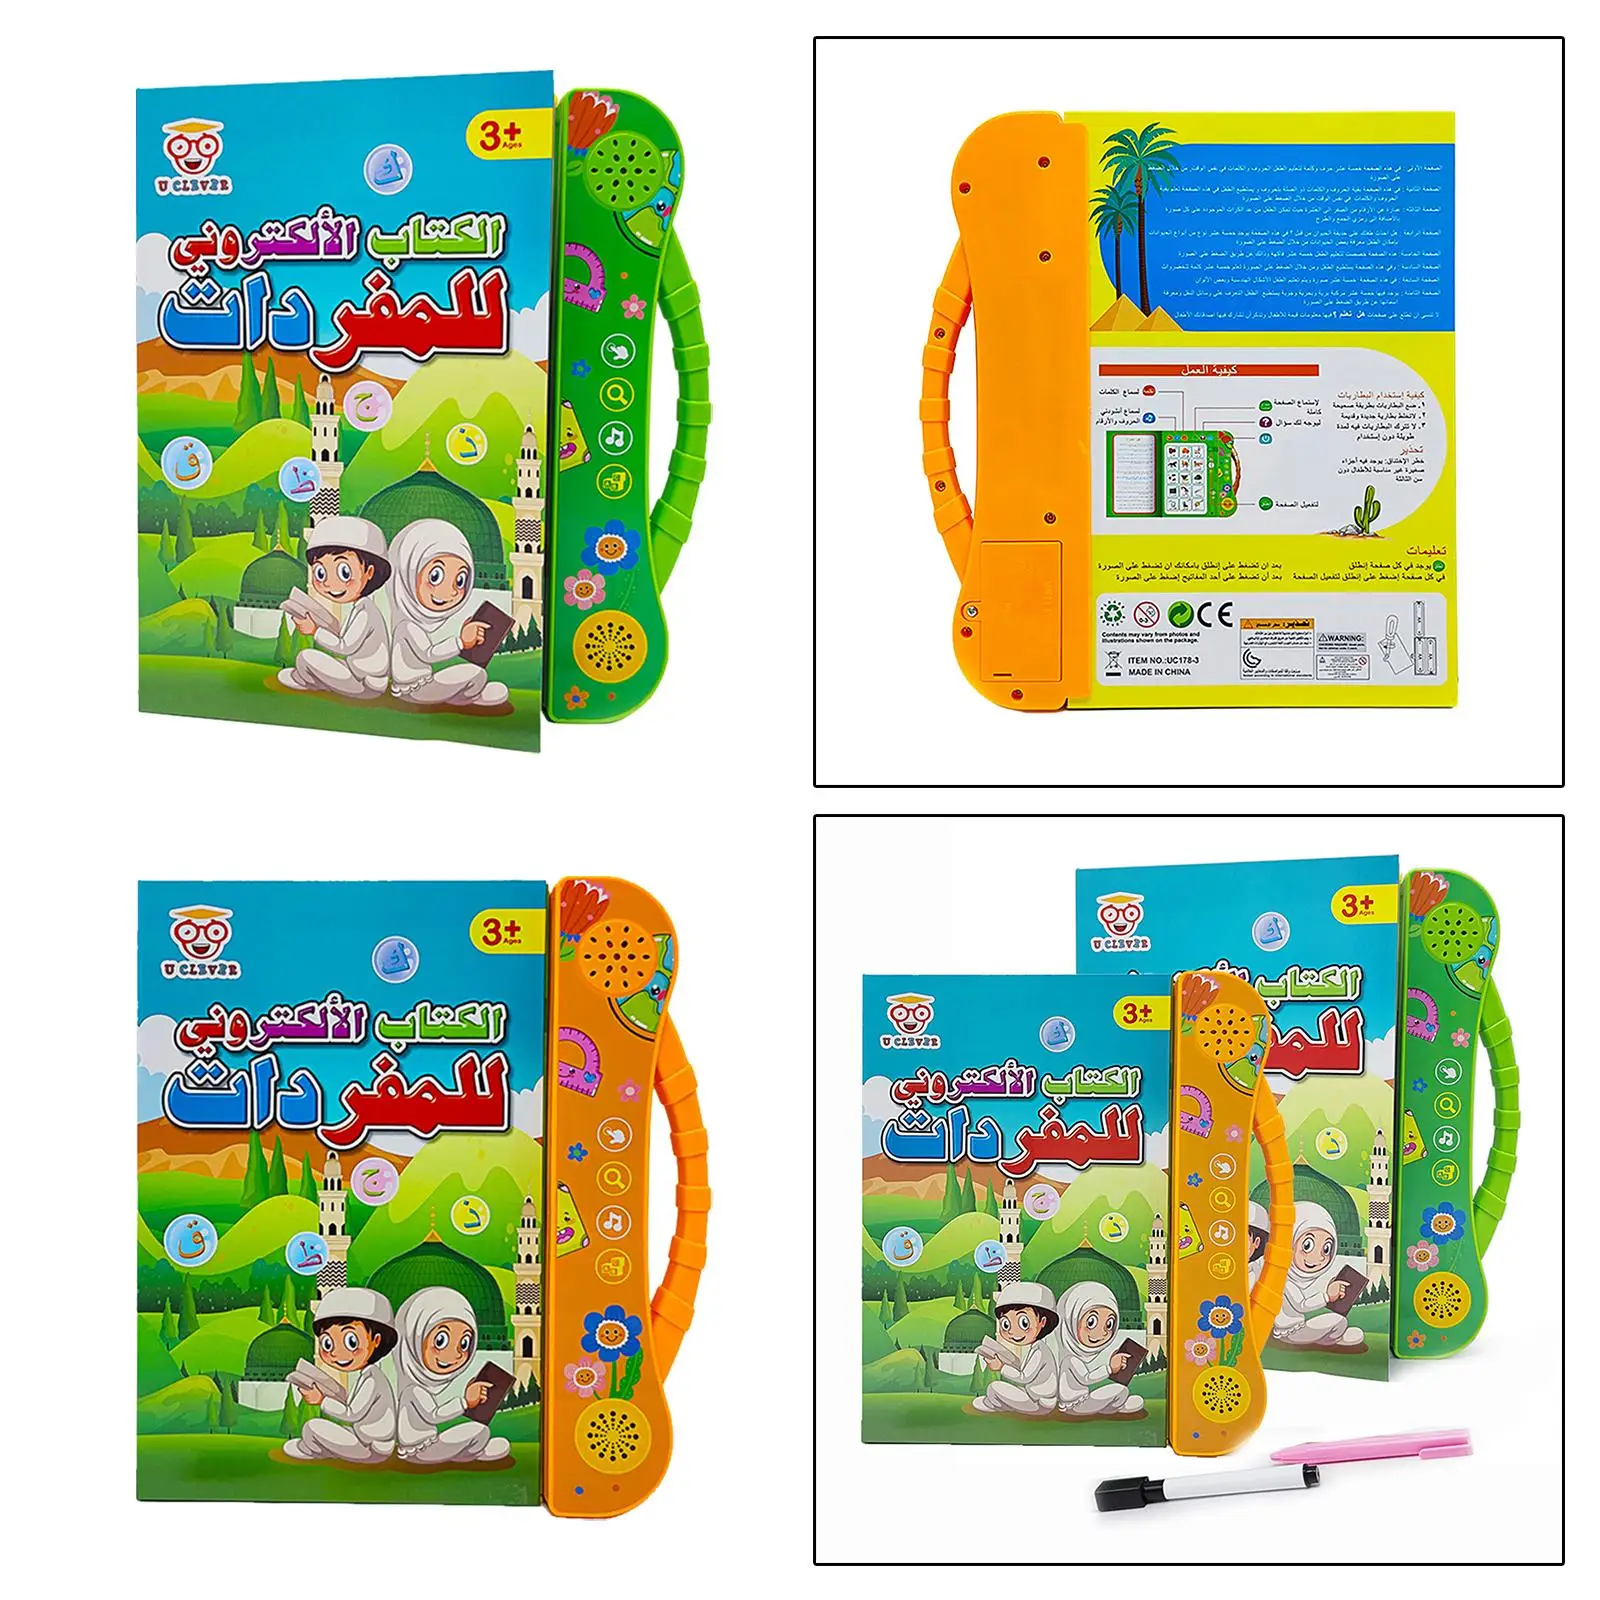 Kids` Learning Arabic Machine Early Educational Arabic Word Learning Toy for